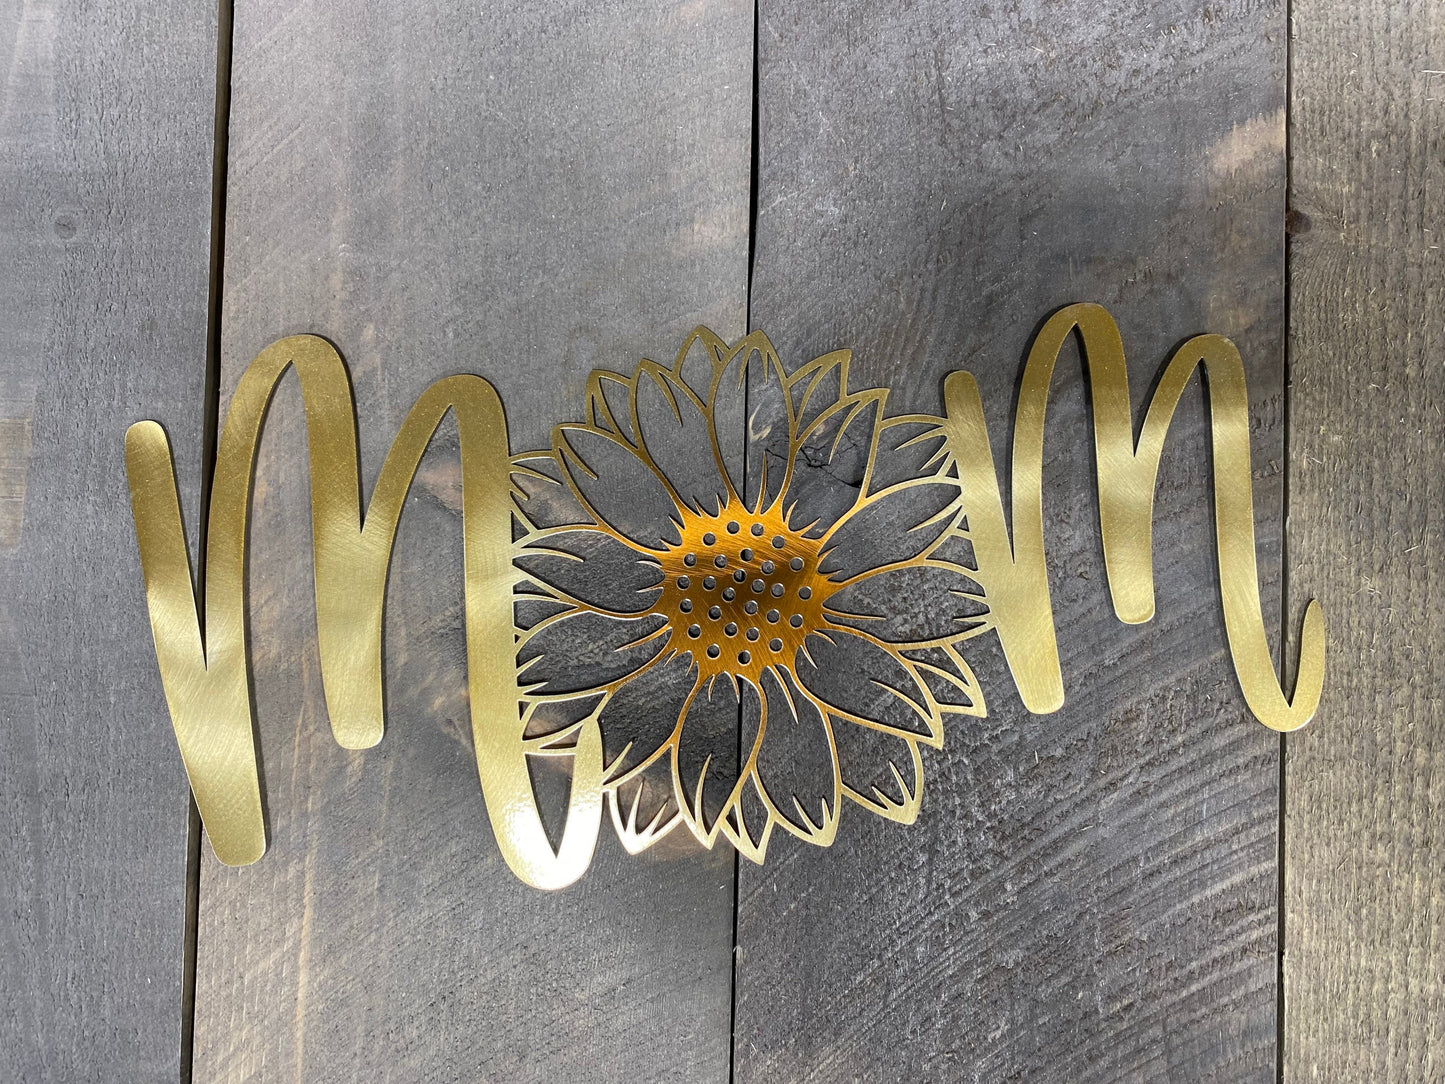 Mom Sunflower Metal wall art, sunflower home decor, she shed decor, sunflower accent, mom metal wall hanging, gifts for mom